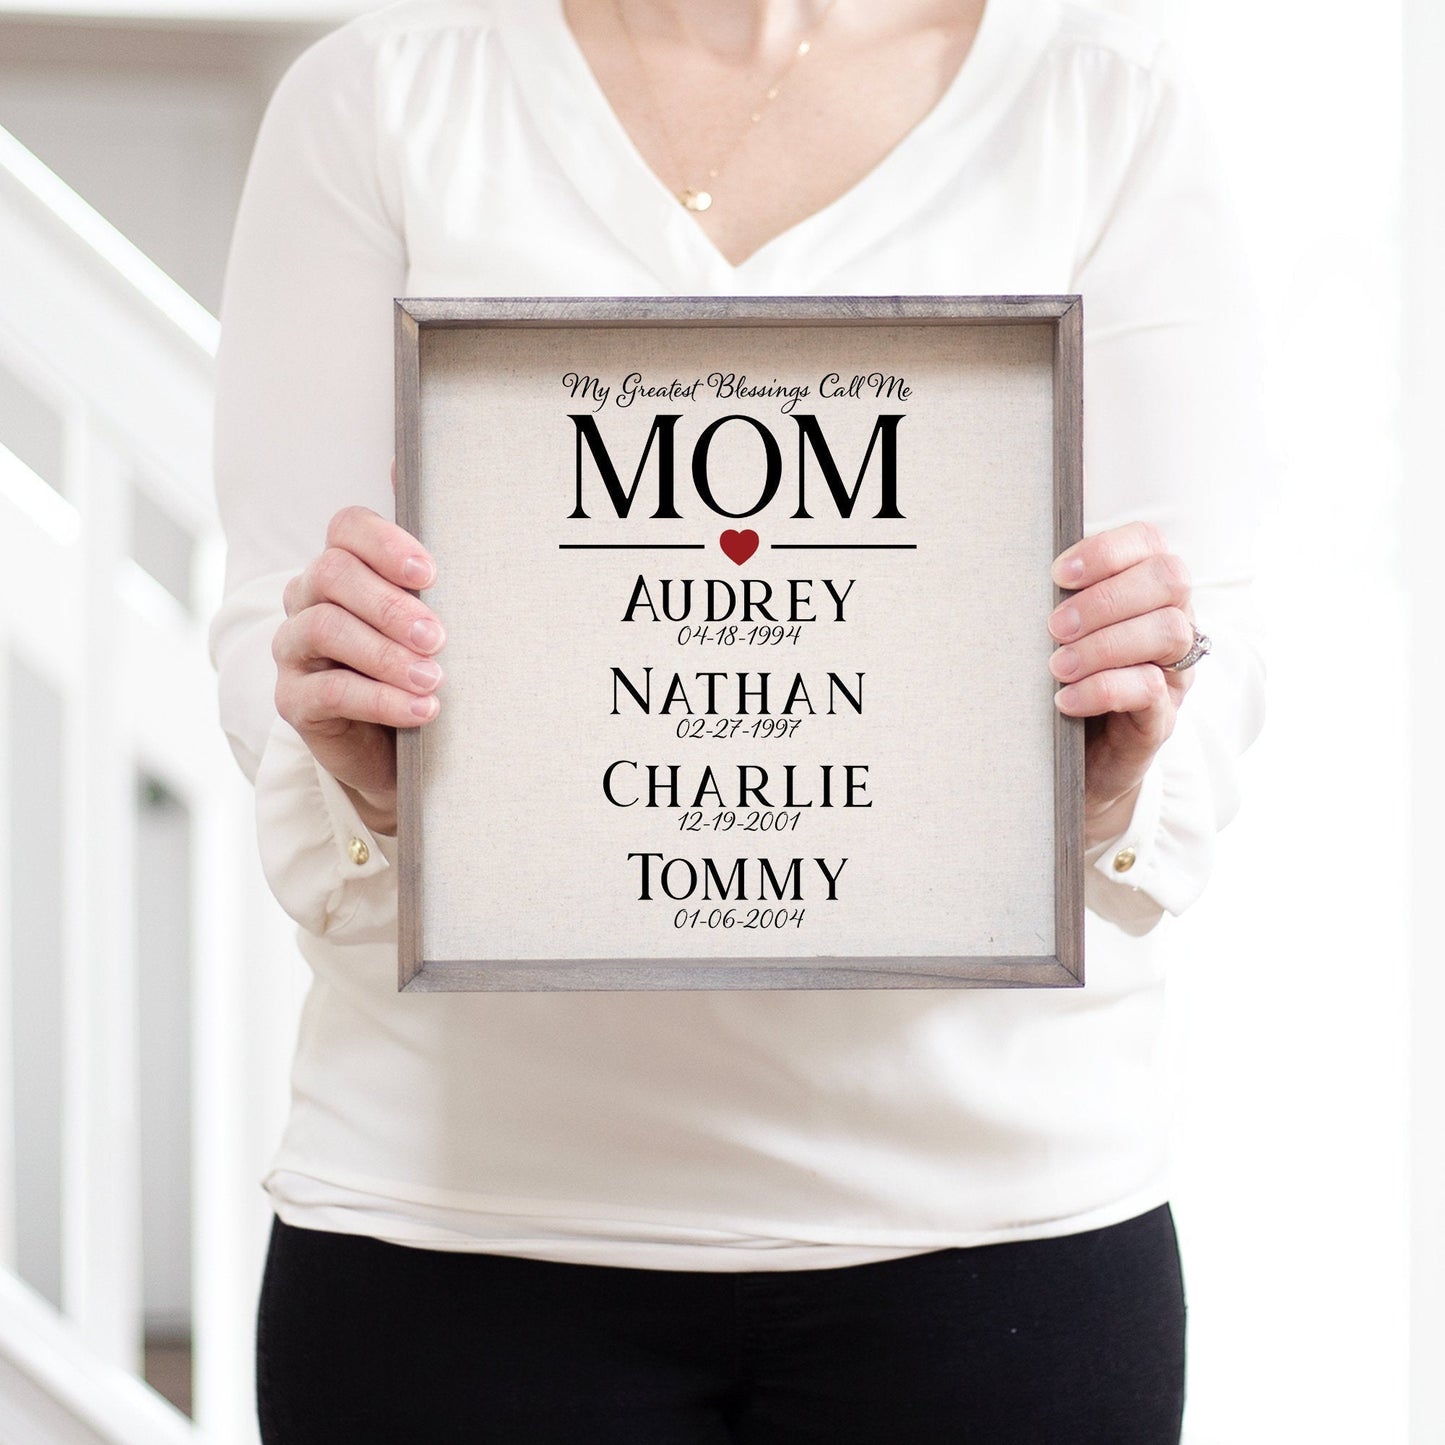 Personalized Gifts for Mom | Gift from Daughter | Gifts for Mom | Unique Mother of the Bride Gift | Mother of the Groom Gift | Mom Gift